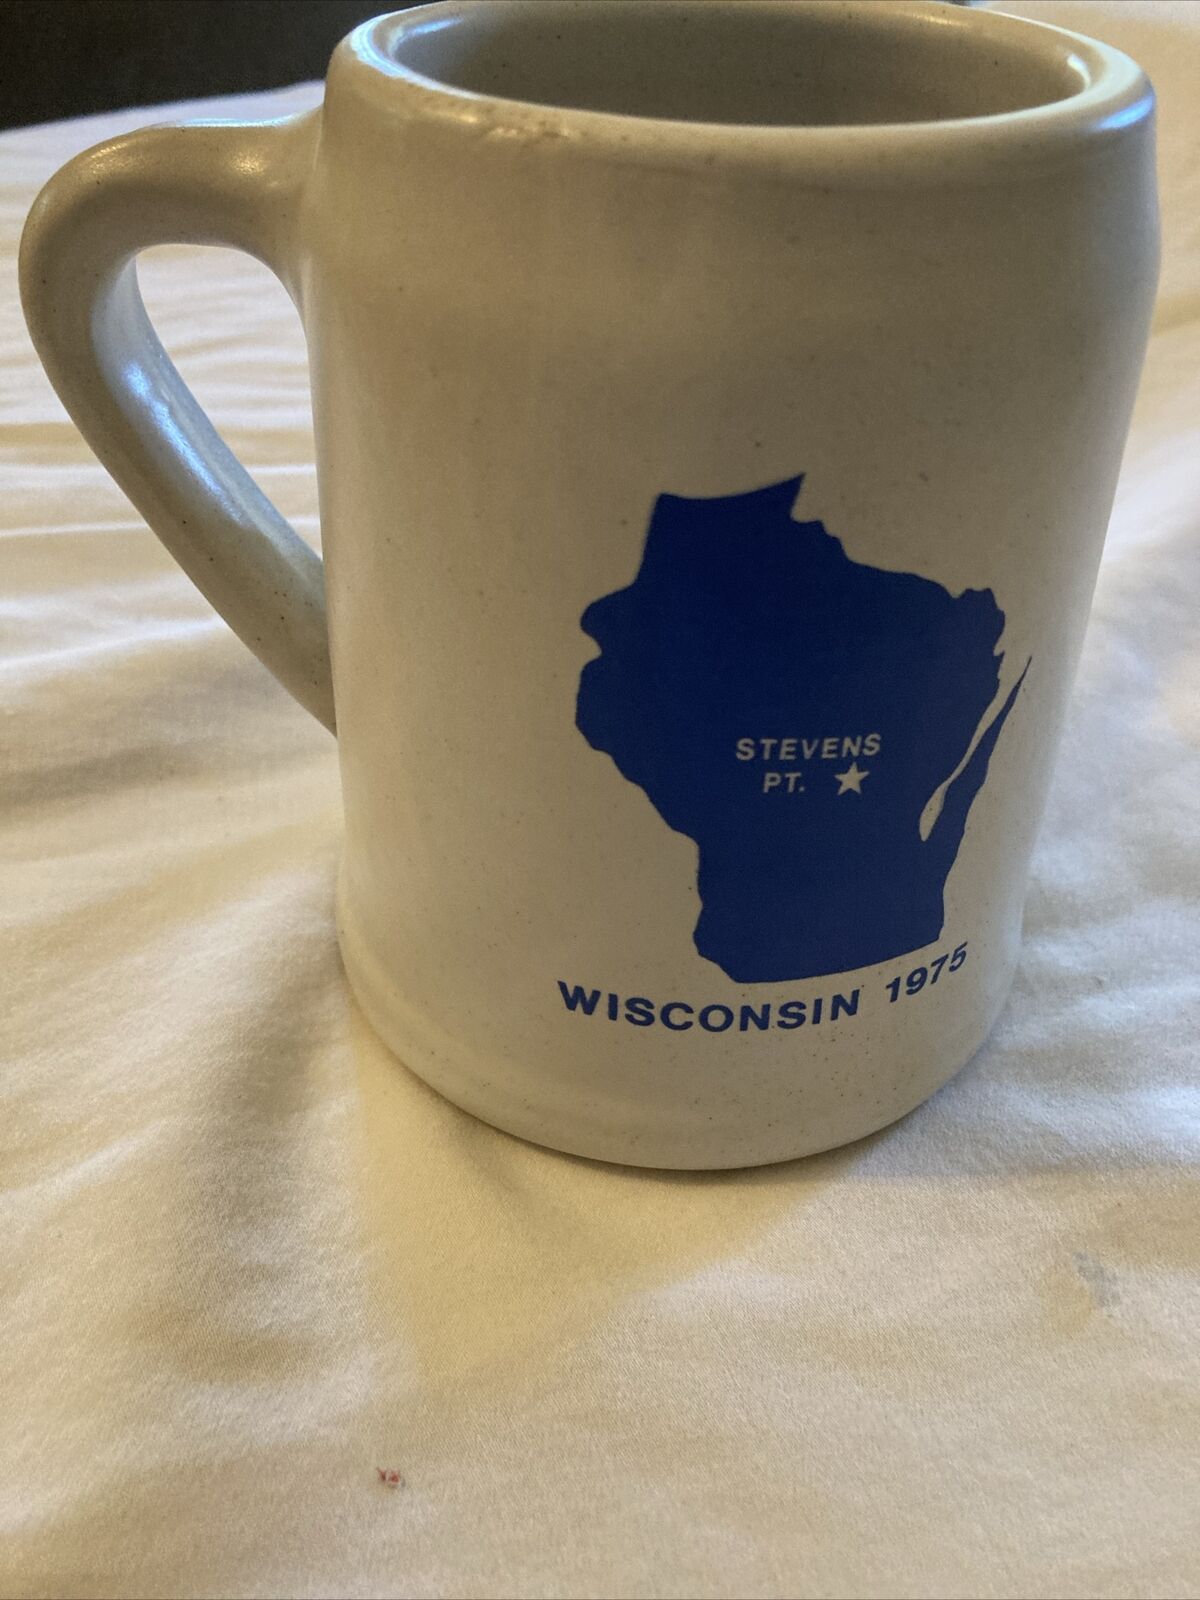 Wisconsin 1975 Fromase Microbial Rennet Wallerstein Large Mug